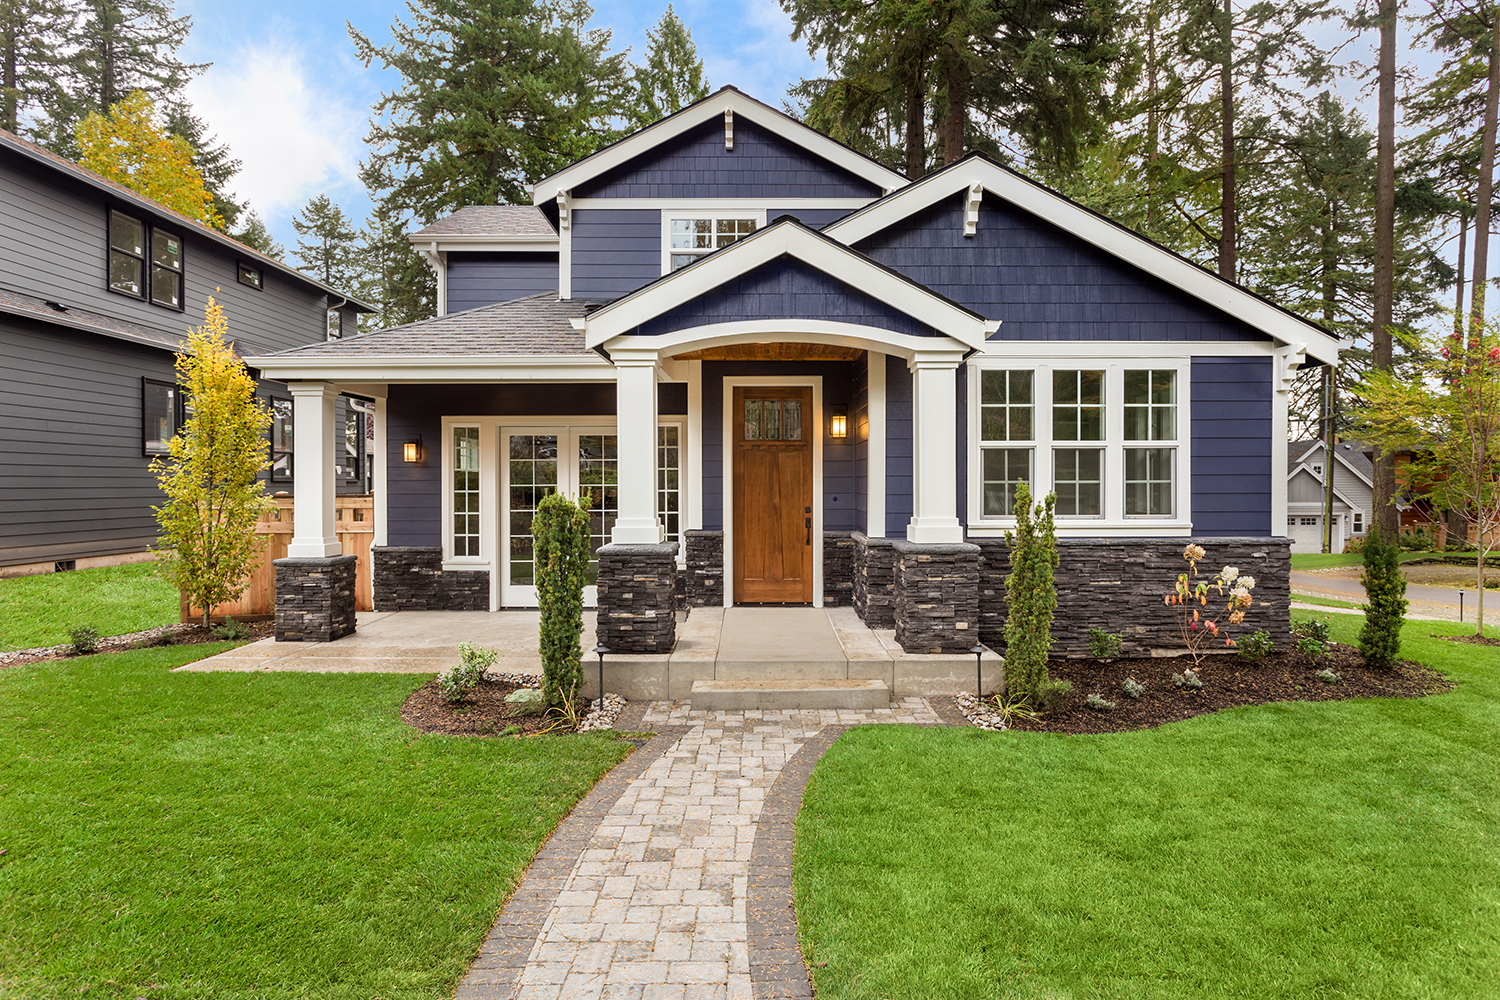 A beautiful exterior of a new luxury home, signifies the issues with home insurance costs.